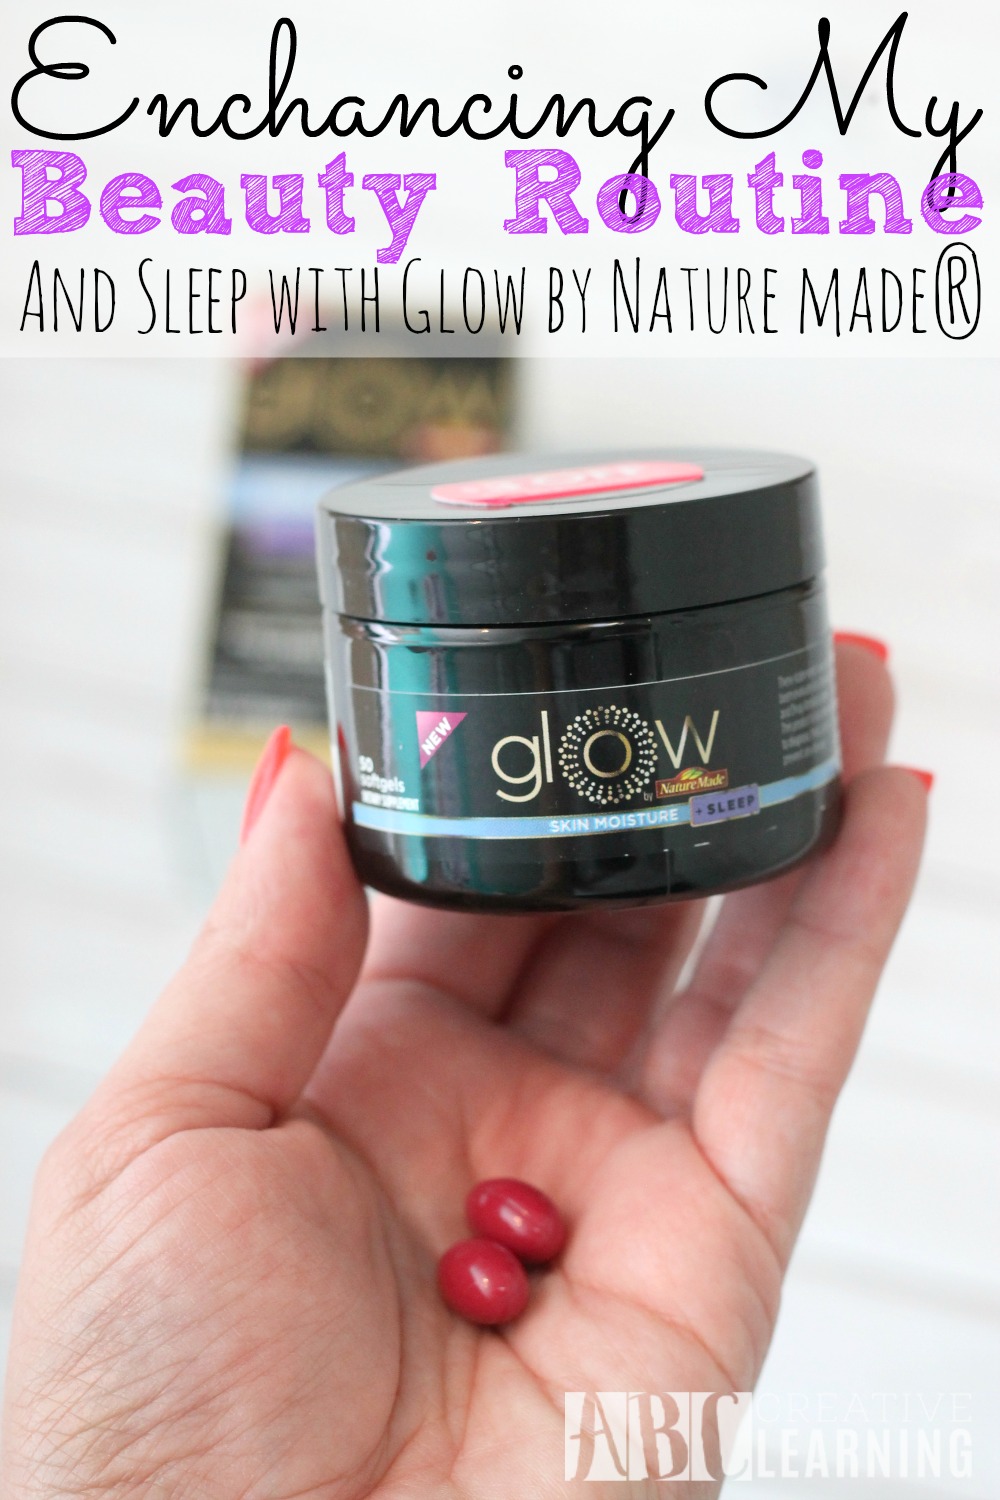 Enhancing My Beauty Routine and Sleep with Glow by Nature Made®